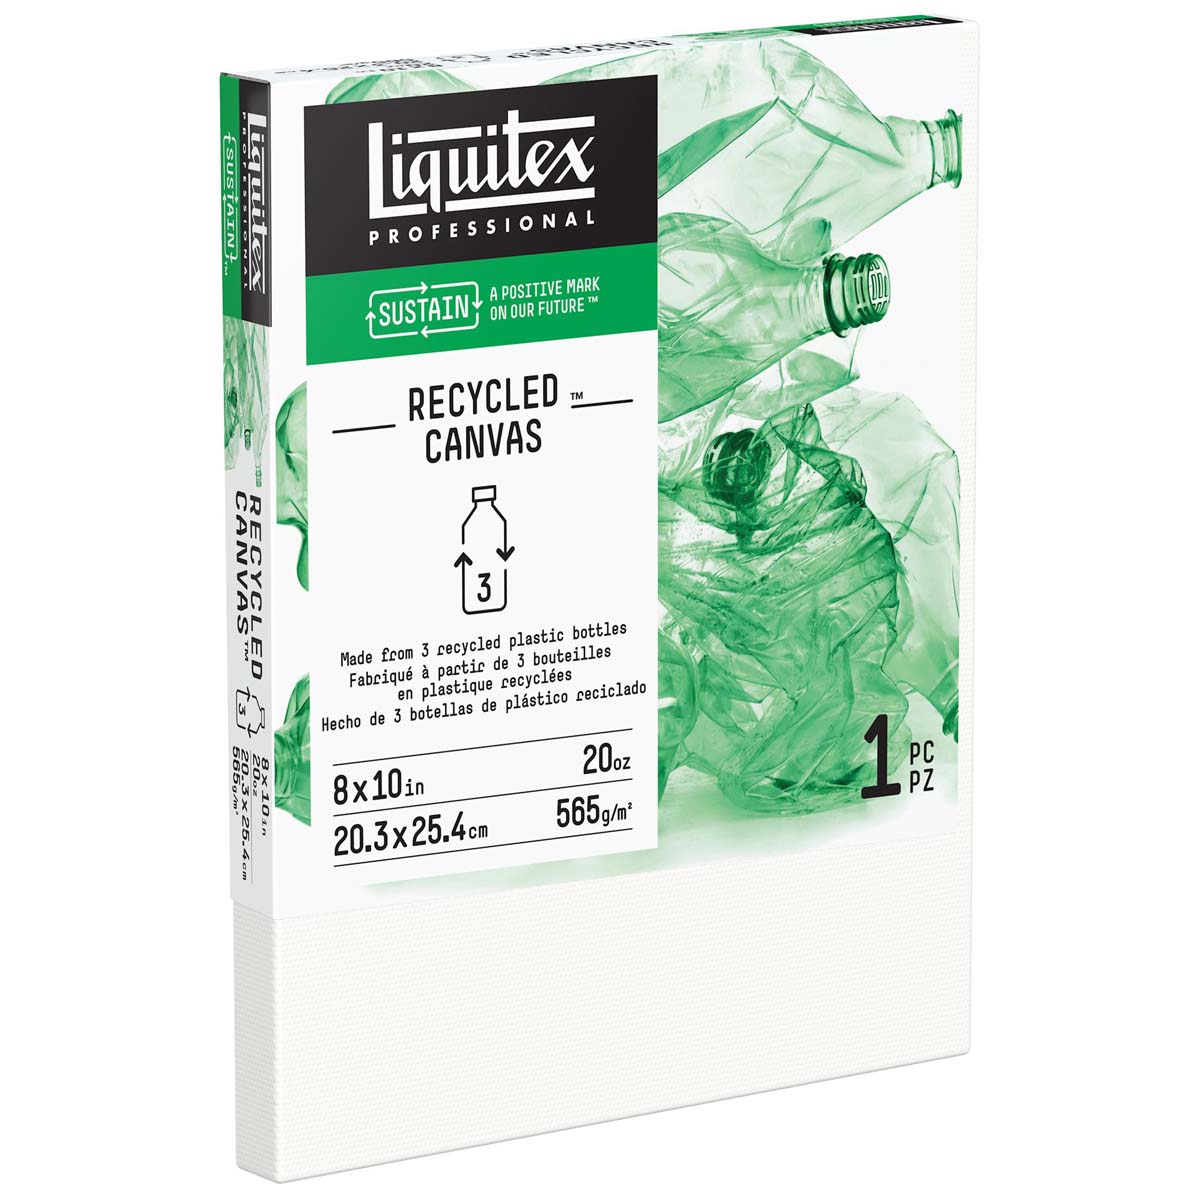 Liquitex Recycled Canvas - Standard Edge - 8x10 inches - 20x25cm